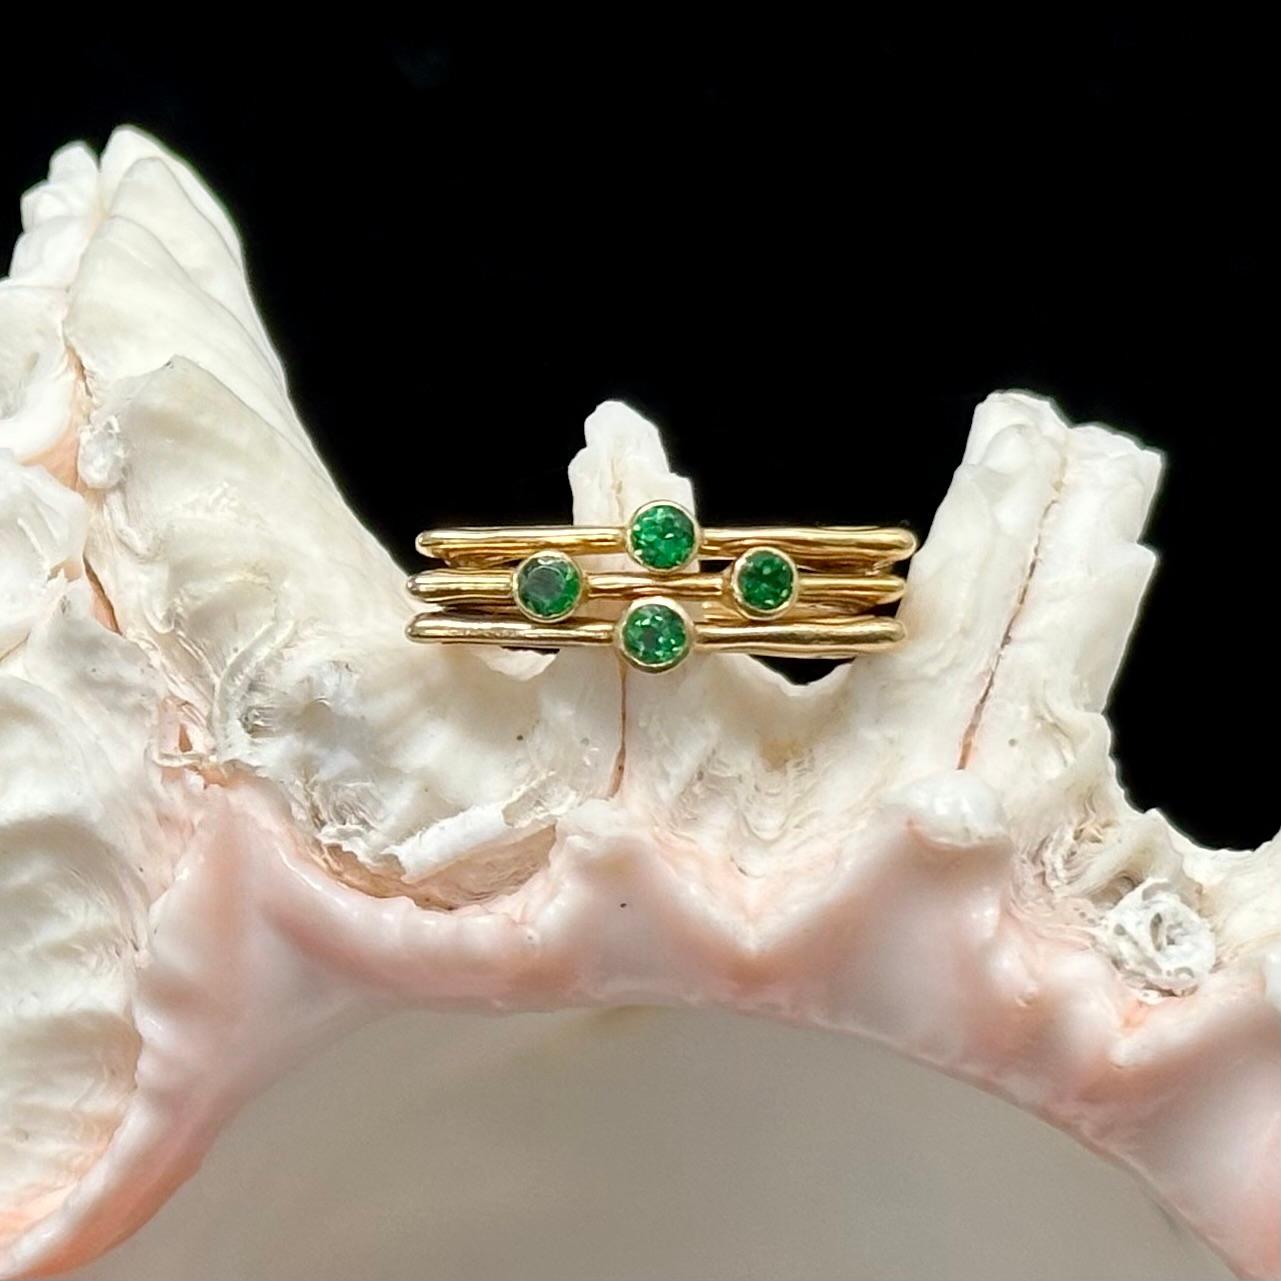 Three separate, interestingly sculpted spiral ornamented rings create a geometric  pattern of brilliant electric green with an arraignment of 3 mm round faceted tsavorite garnets in the center.  The 3 flat lines of gold with the central stones